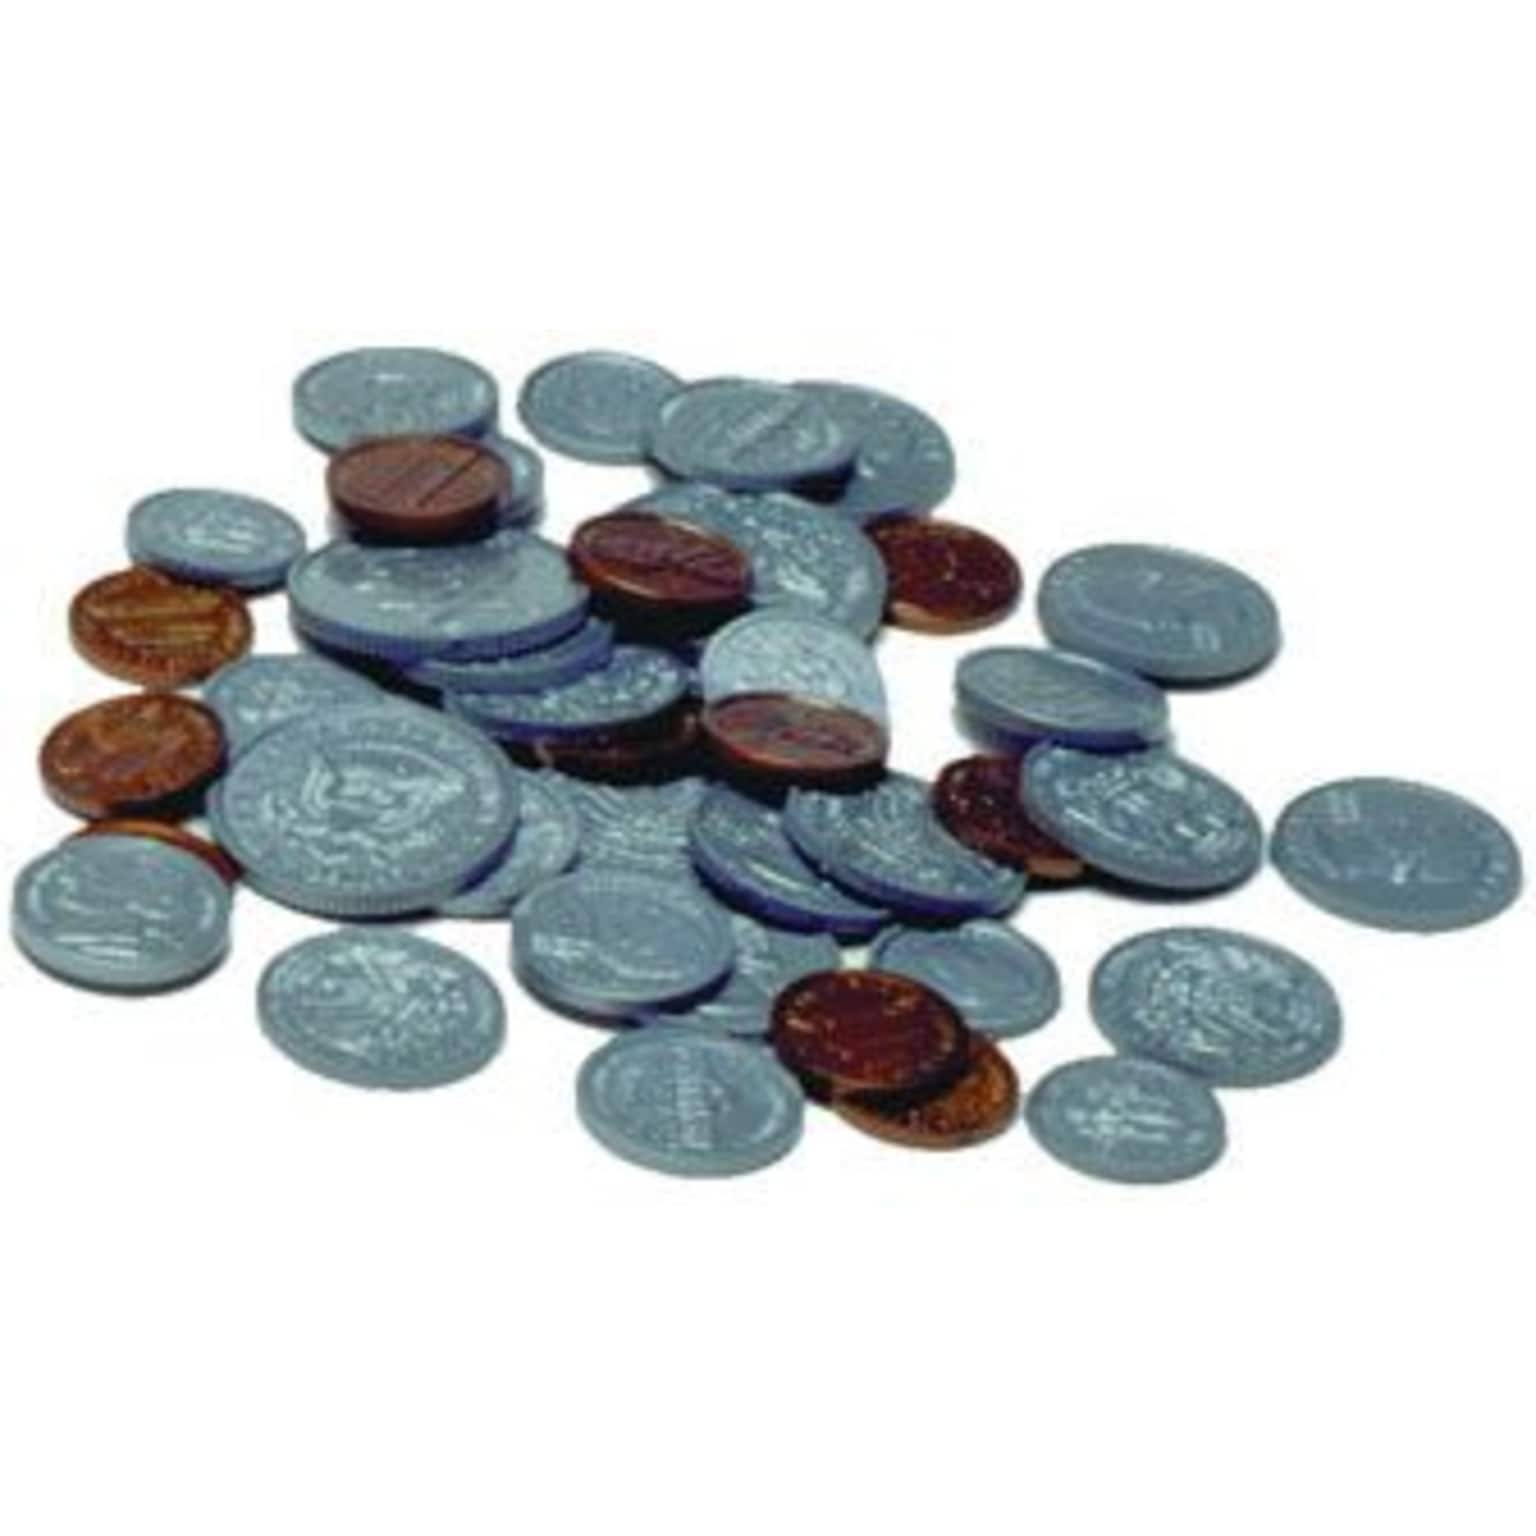 Money, Learning Advantage™ Coin Set